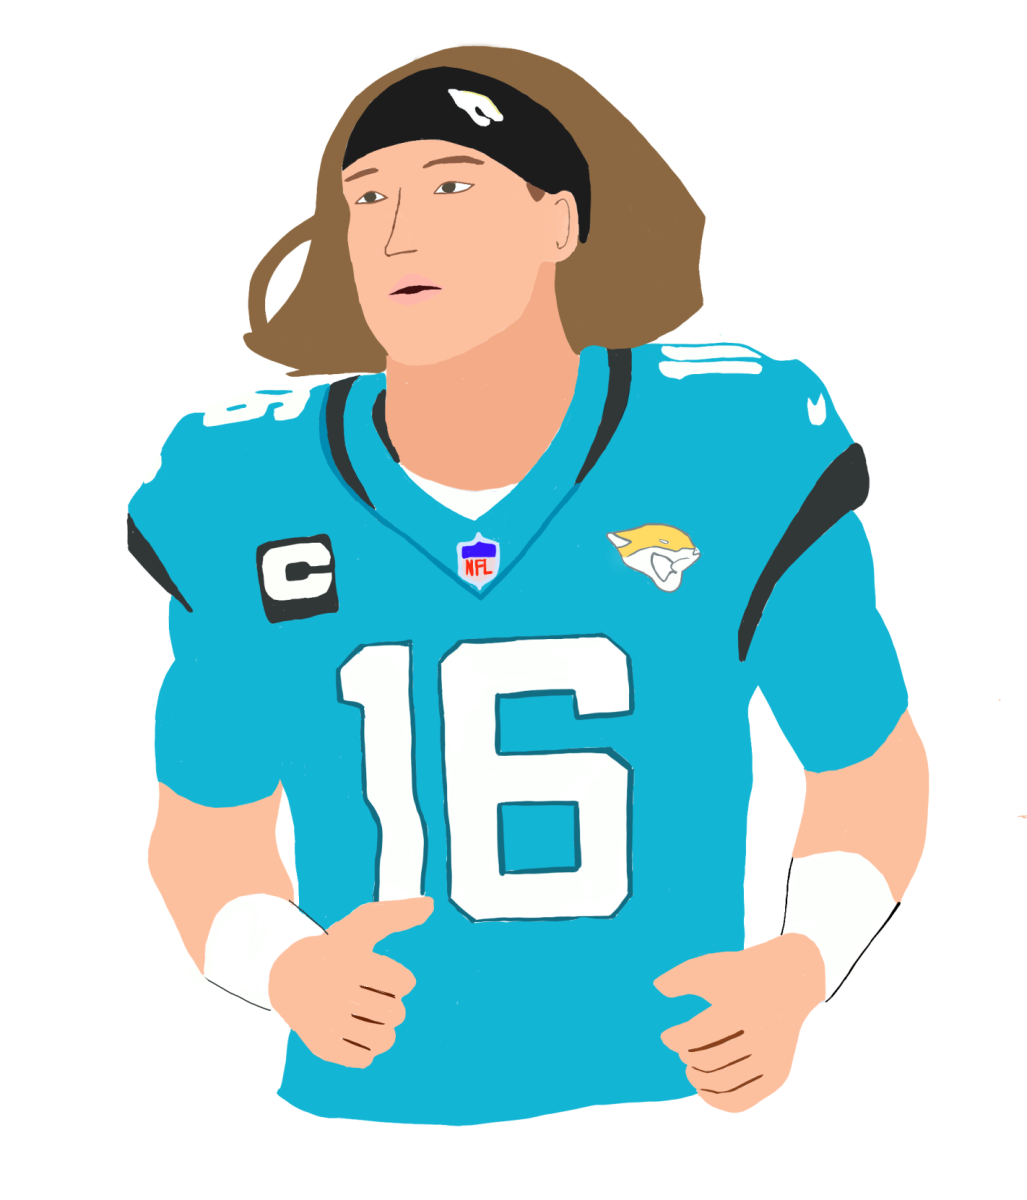 Jacksonville Jaguars Trevor Lawrence stands as a good candidate to earn this NFL seasons MVP award. The Jaguars drafted Lawrence out of Clemson as the first overall pick in 2021.